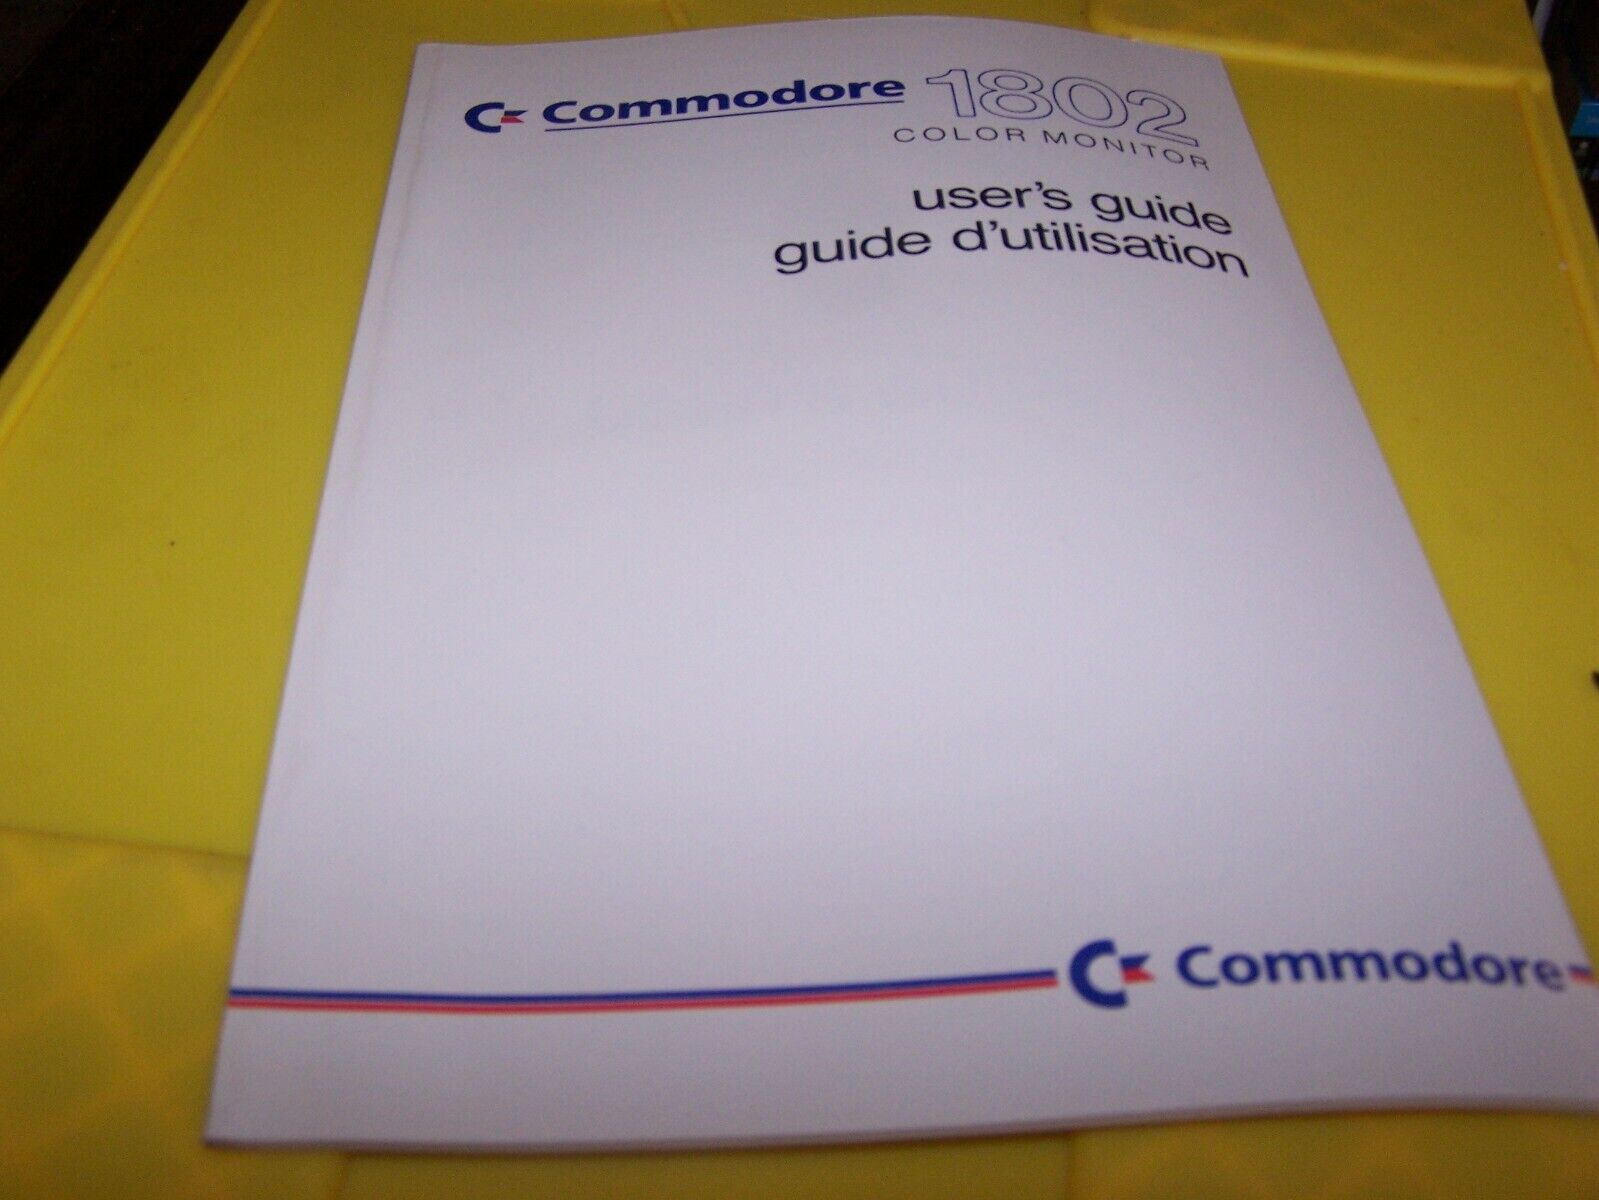 Commodore 1802 Color Mon itor User\'s Guide 319885-02 33 Pages